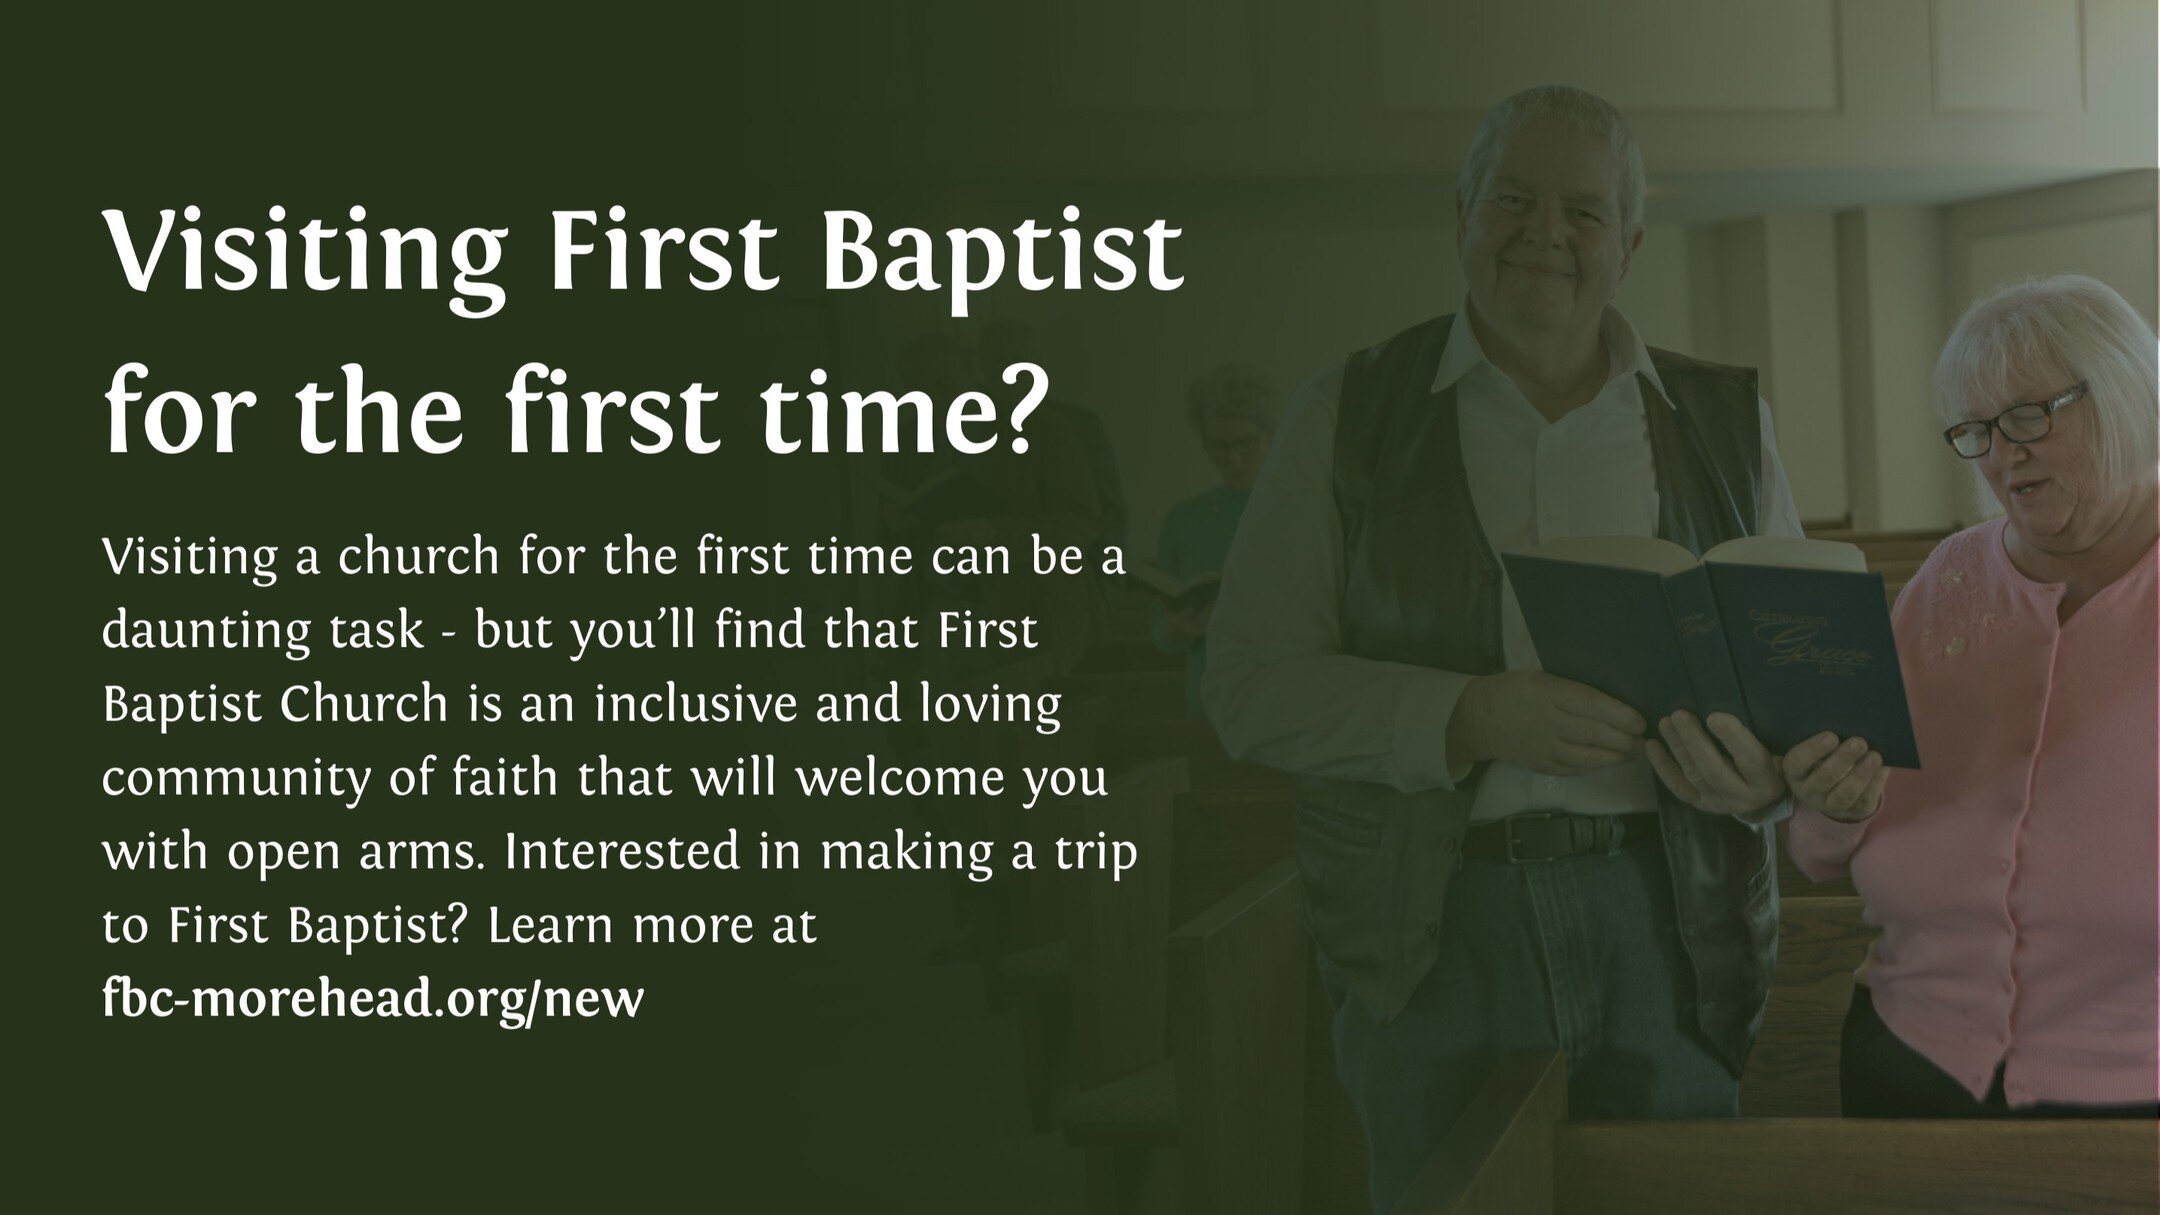 Wanting to visit for the first time? SCARY, we know! Plan your visit here: fbc-morehead.org/new